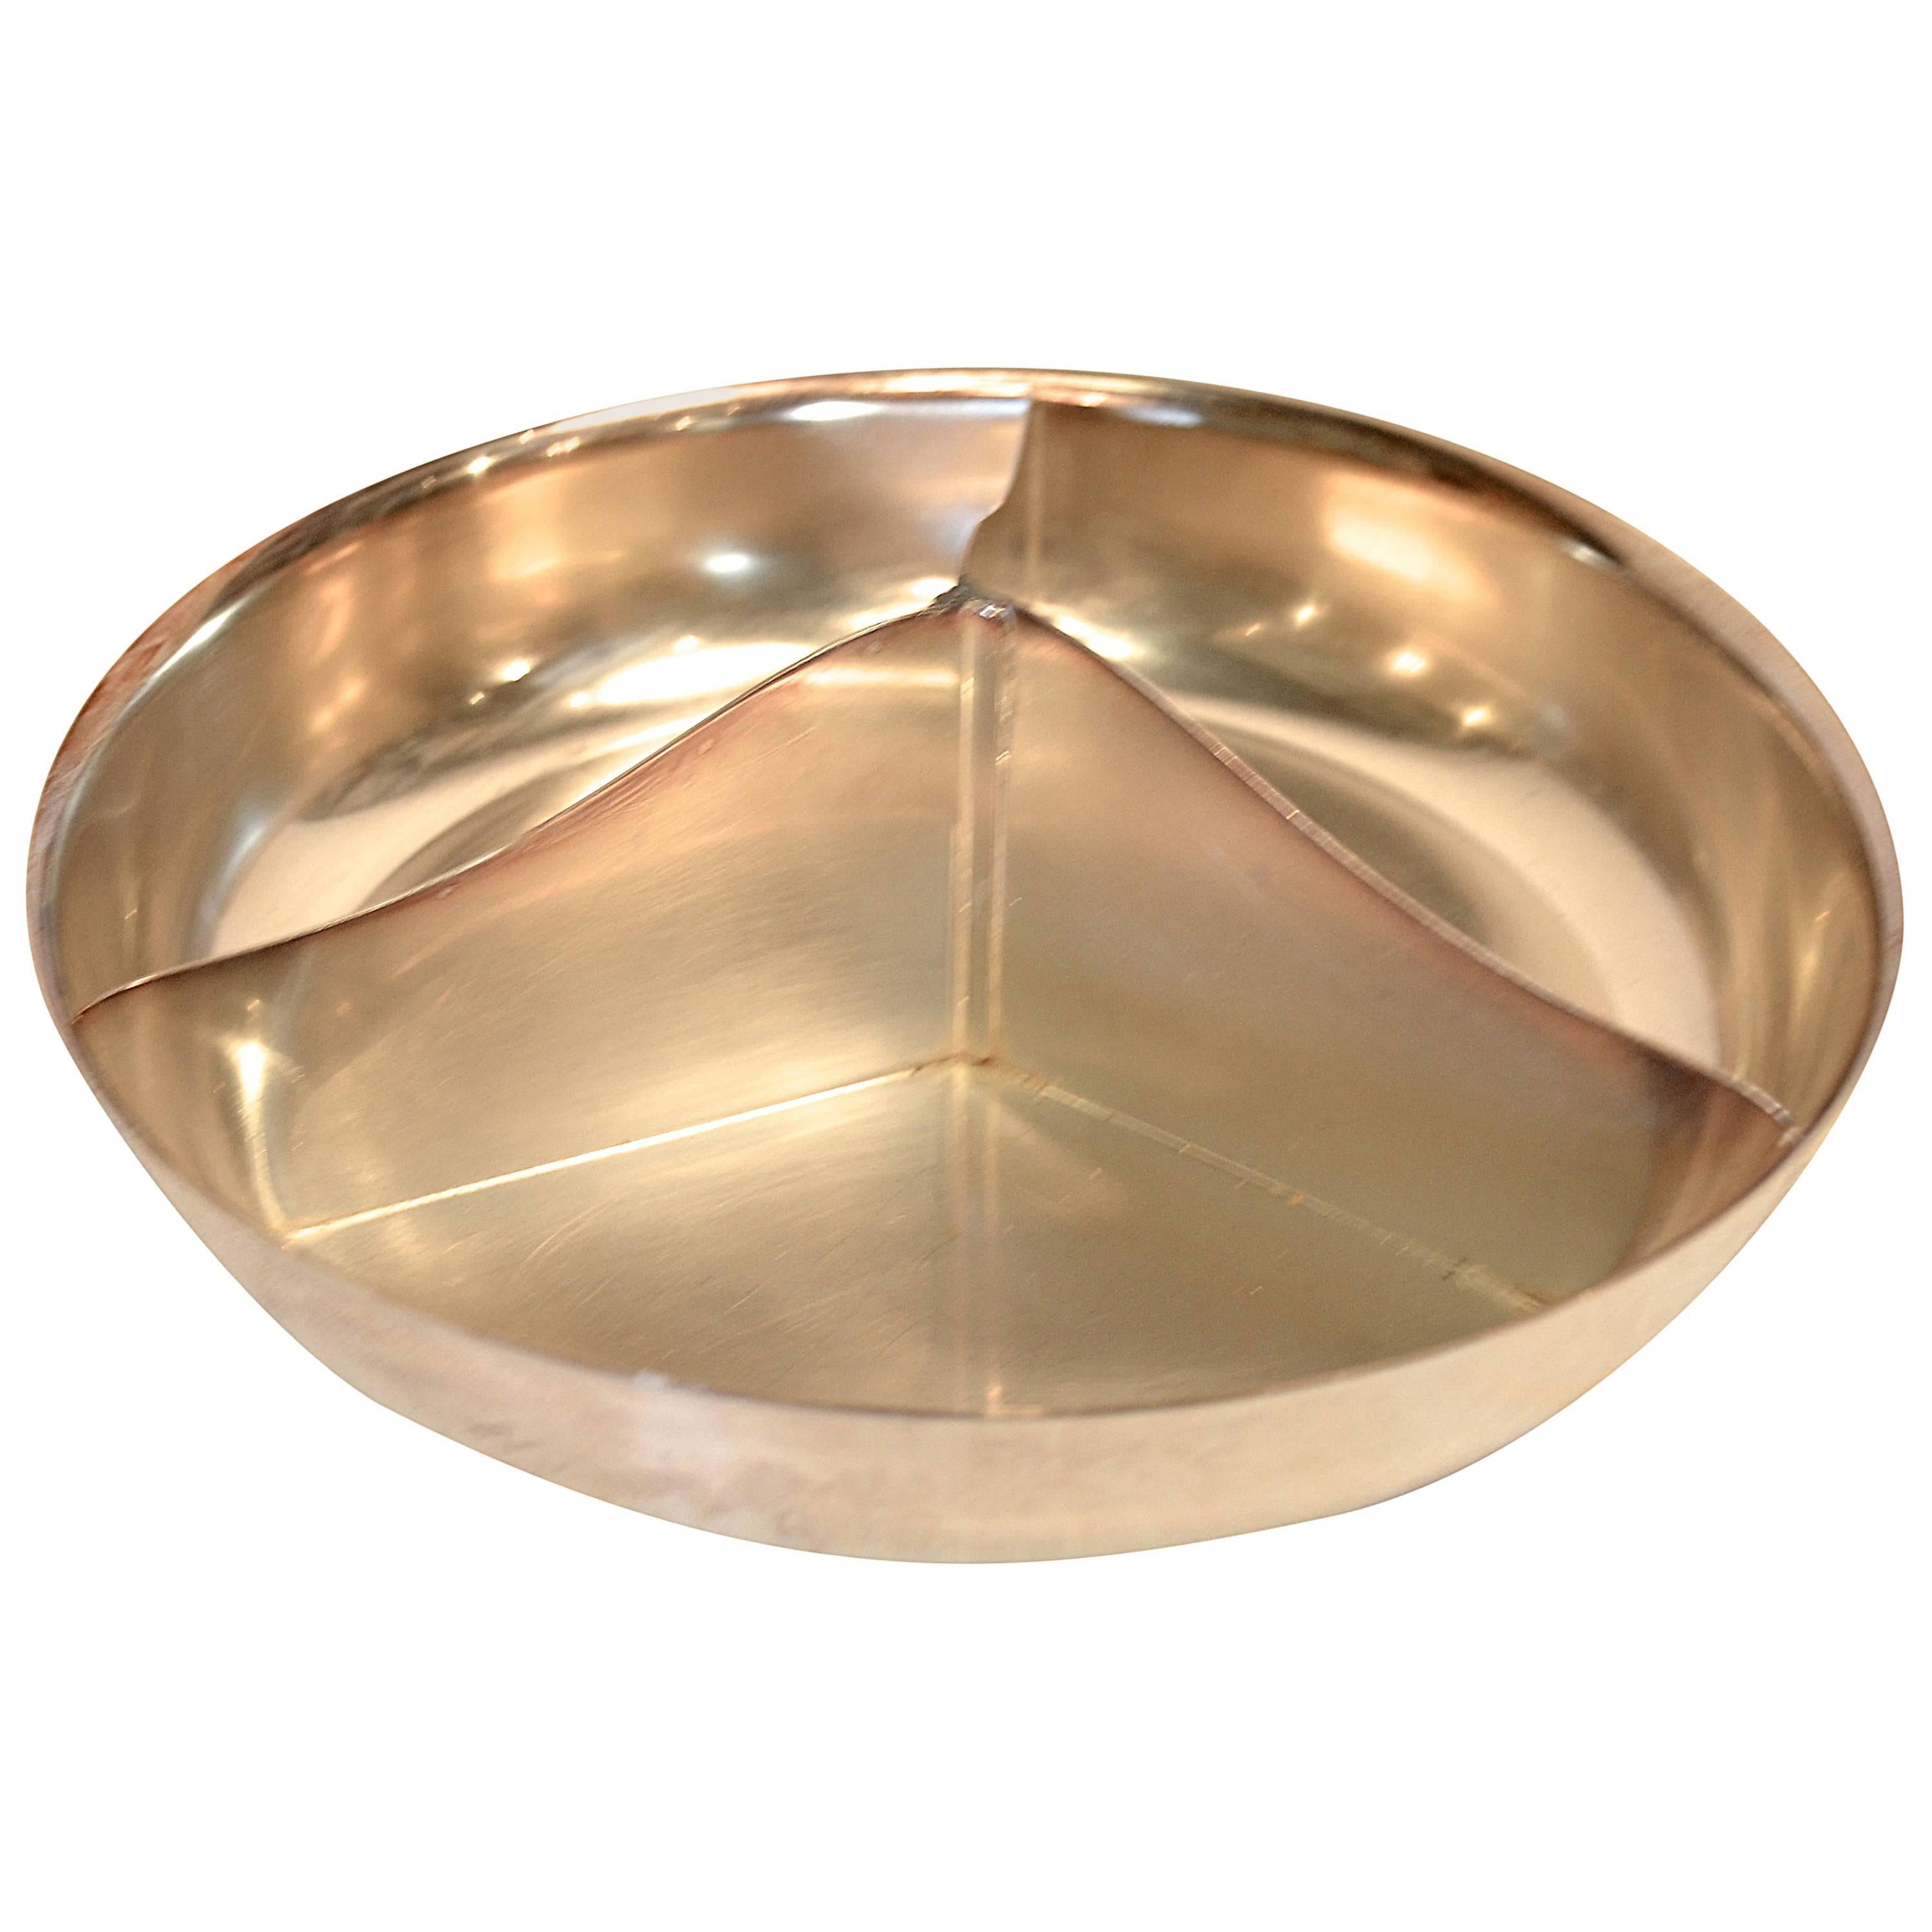 Silver Divided Snack Bowl For Sale